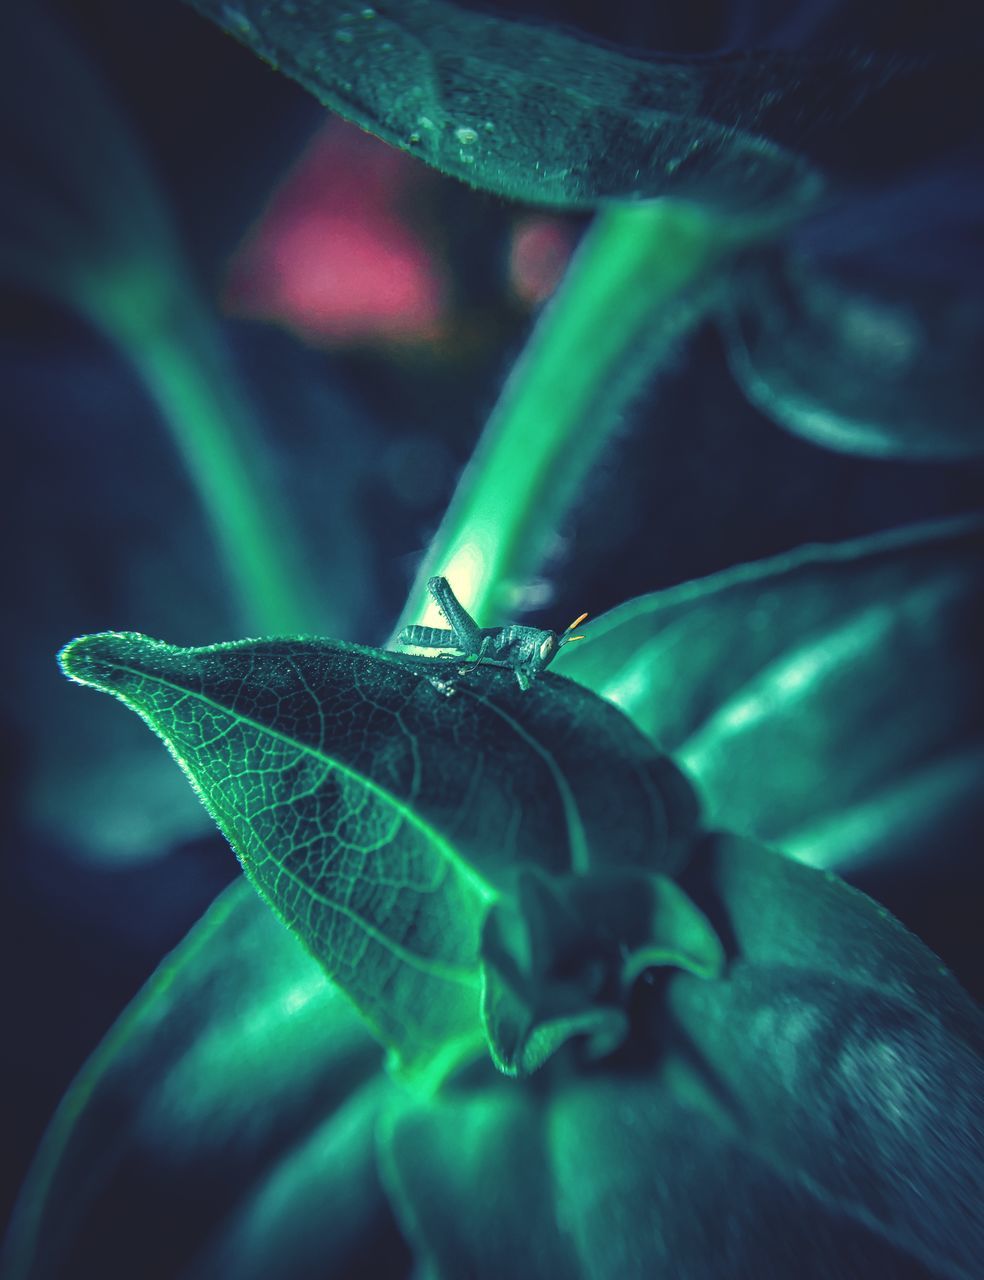 green, macro photography, leaf, plant part, close-up, nature, blue, no people, flower, animal, plant, animal themes, darkness, one animal, beauty in nature, animal wildlife, wildlife, insect, petal, light